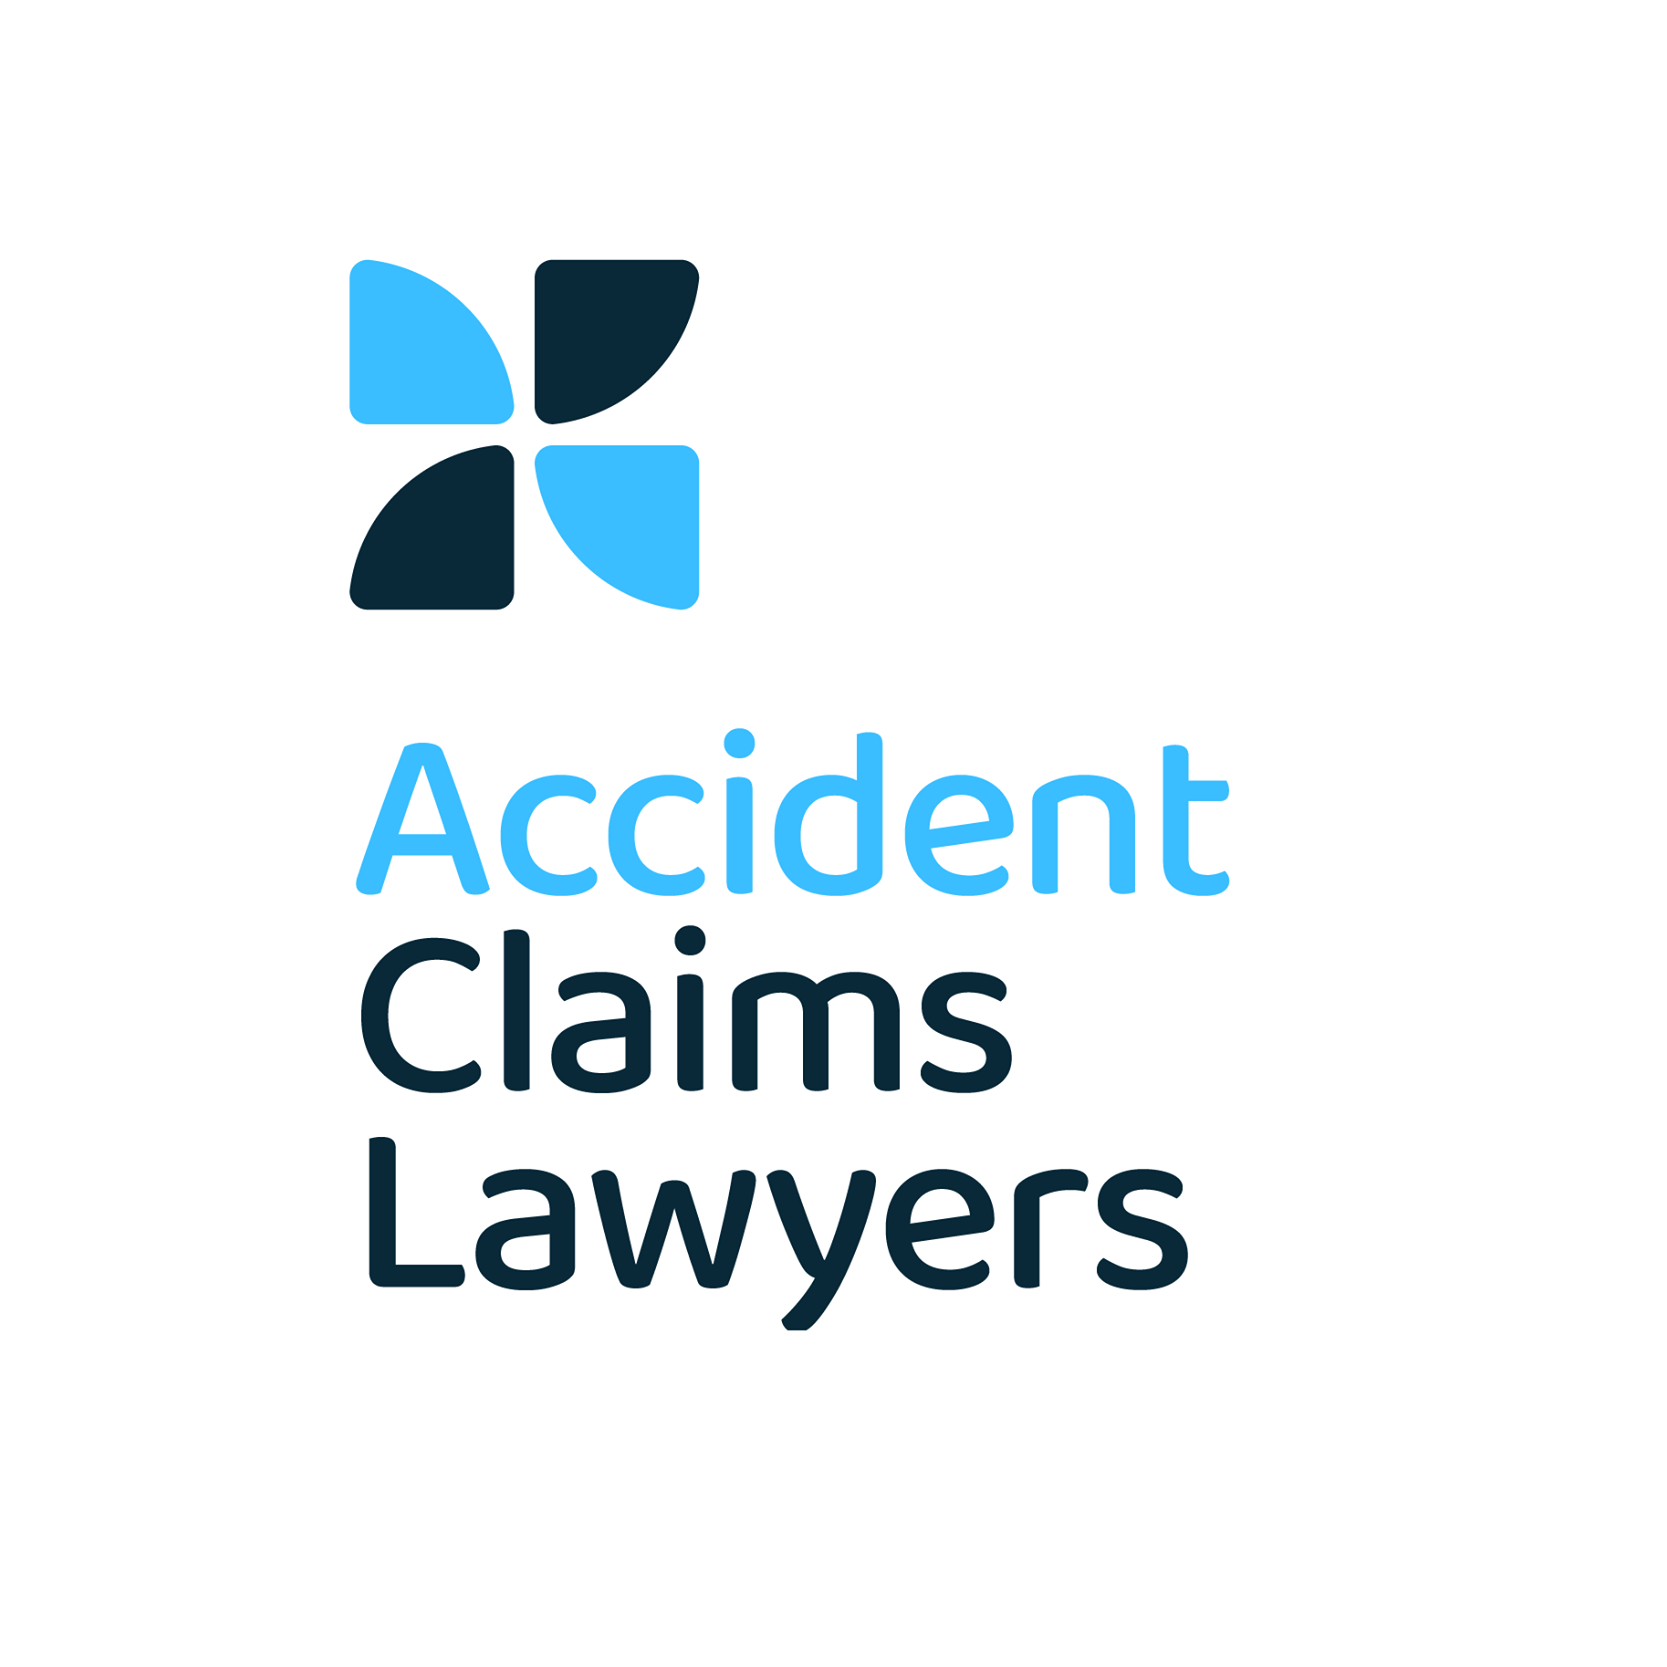 Company logo of Accident Claims Lawyers